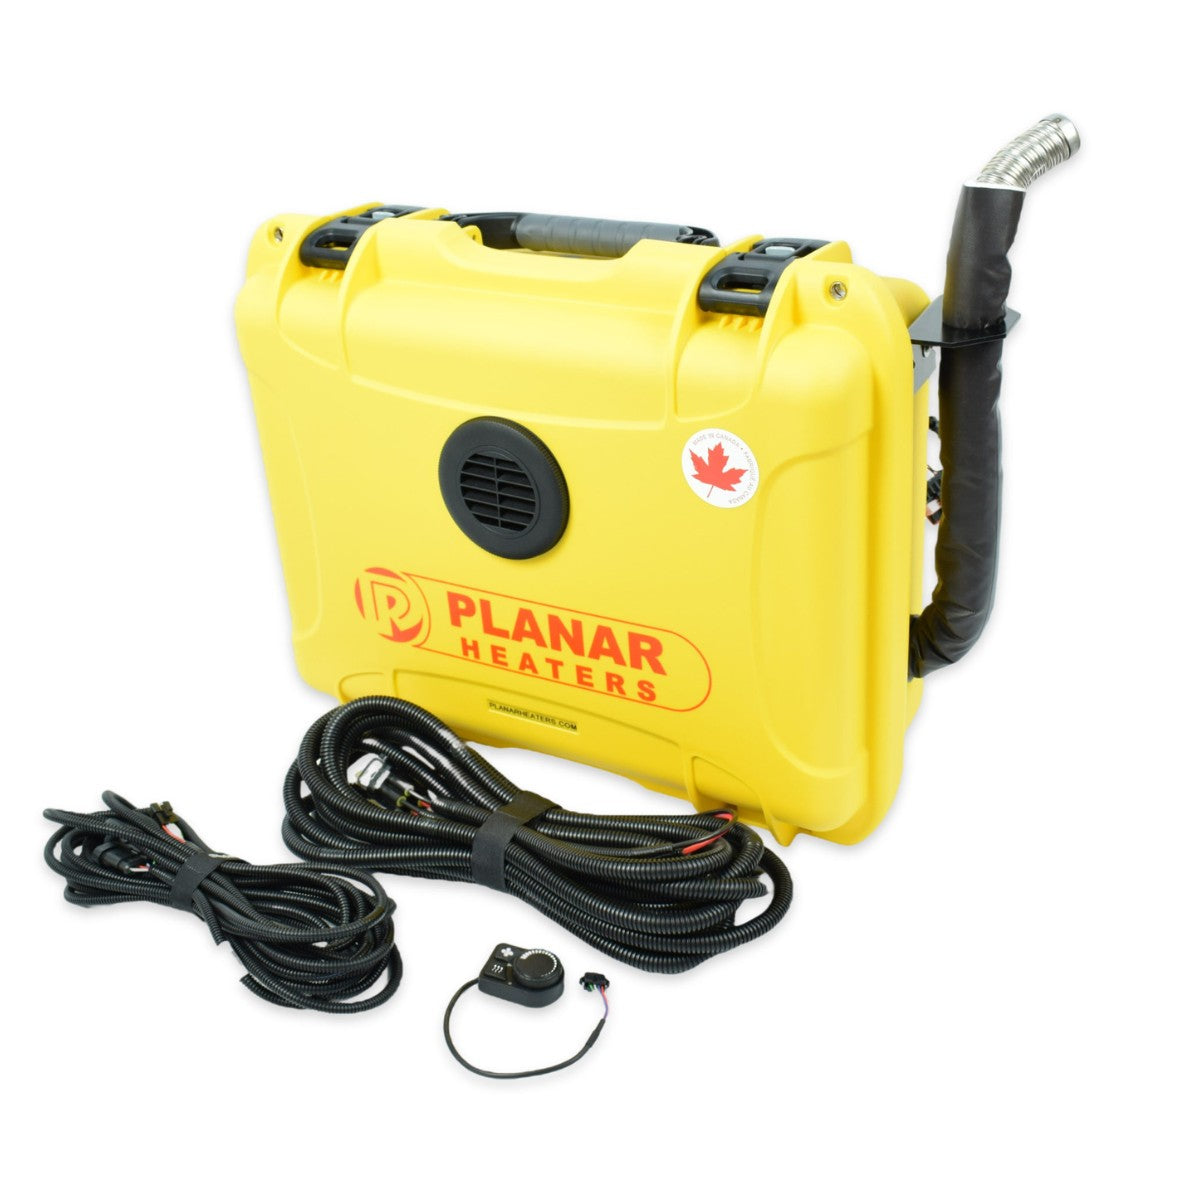 Planar Portable 4 kWh / 12V Heater + PU27 Controller + 10 ft air duct - Olive